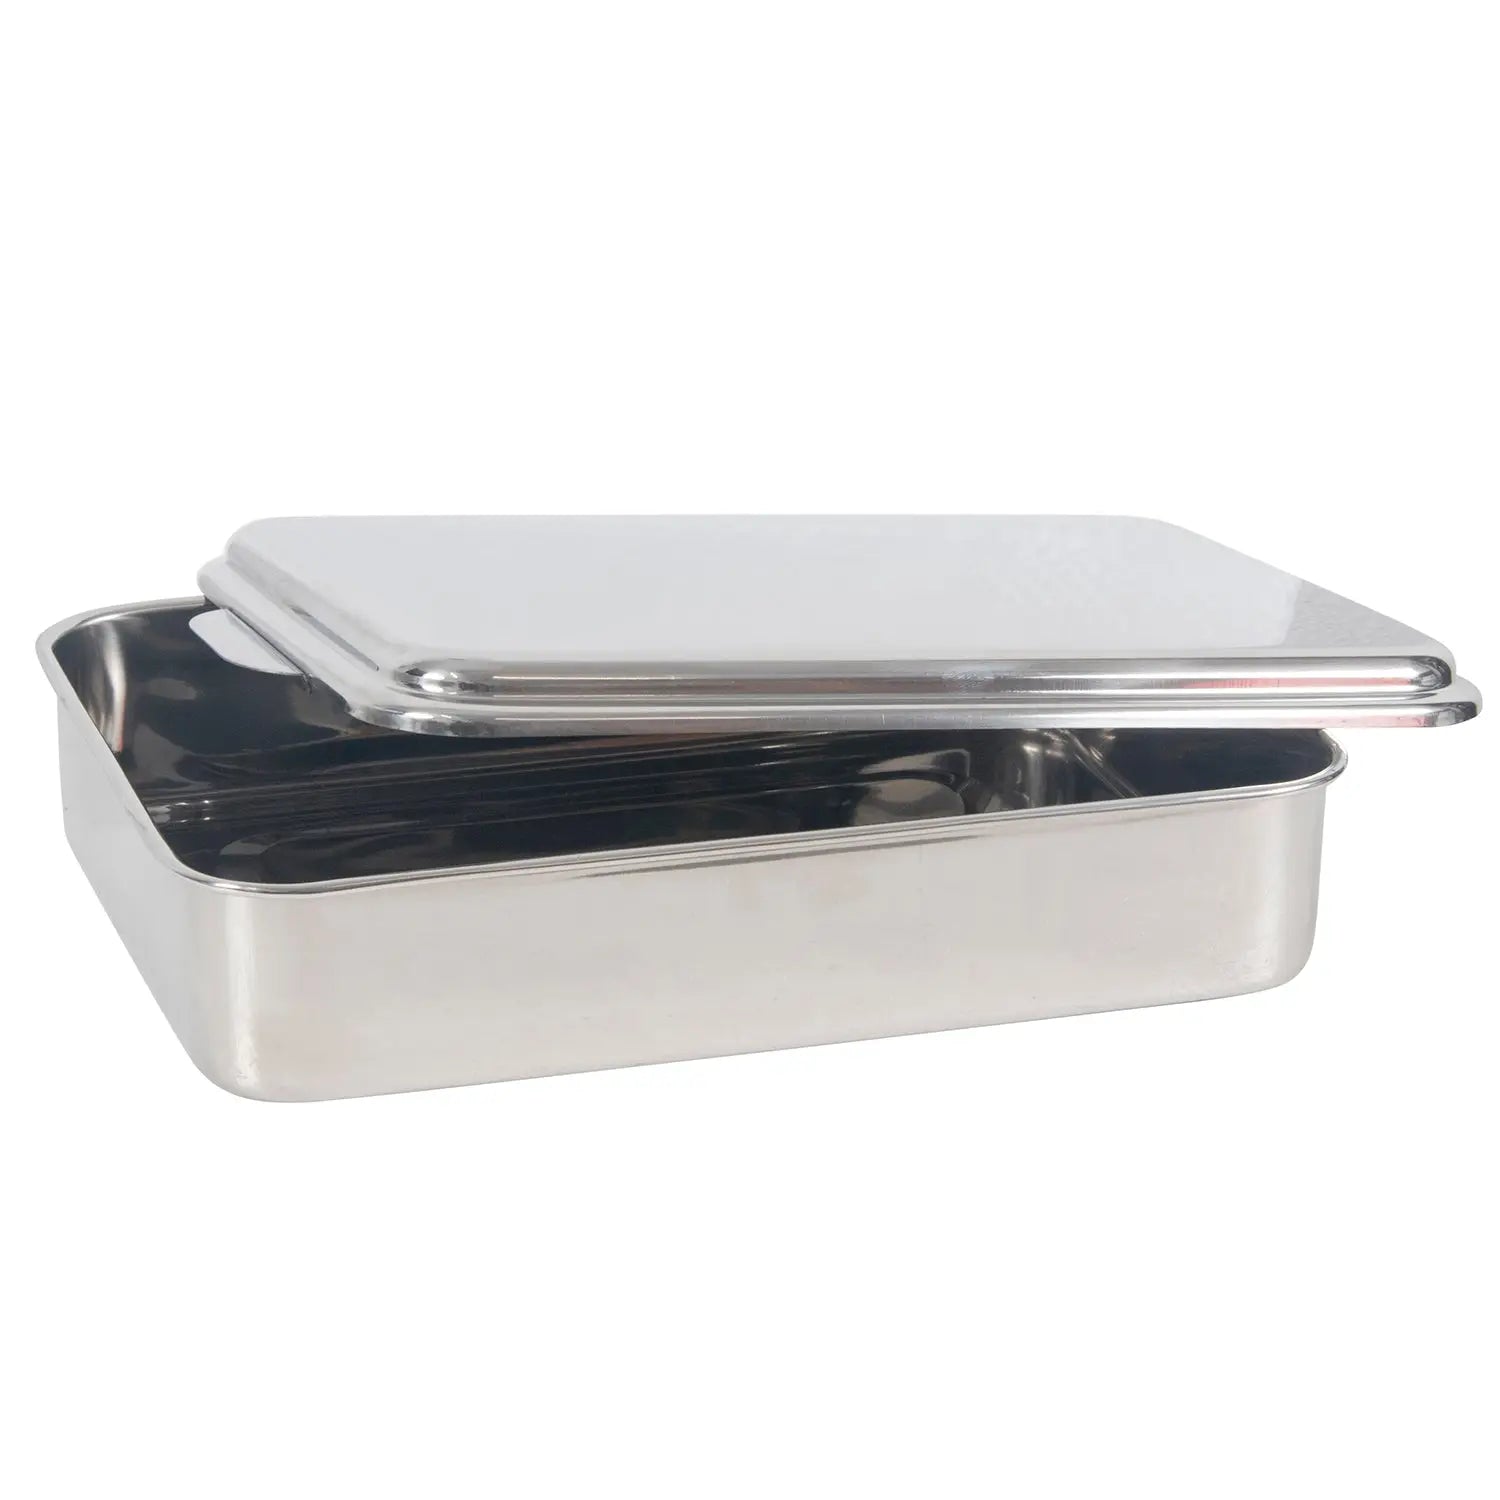 Oneida Simply Sweet Metal Cake Pan with Plastic Lid, 9 x 13 inches